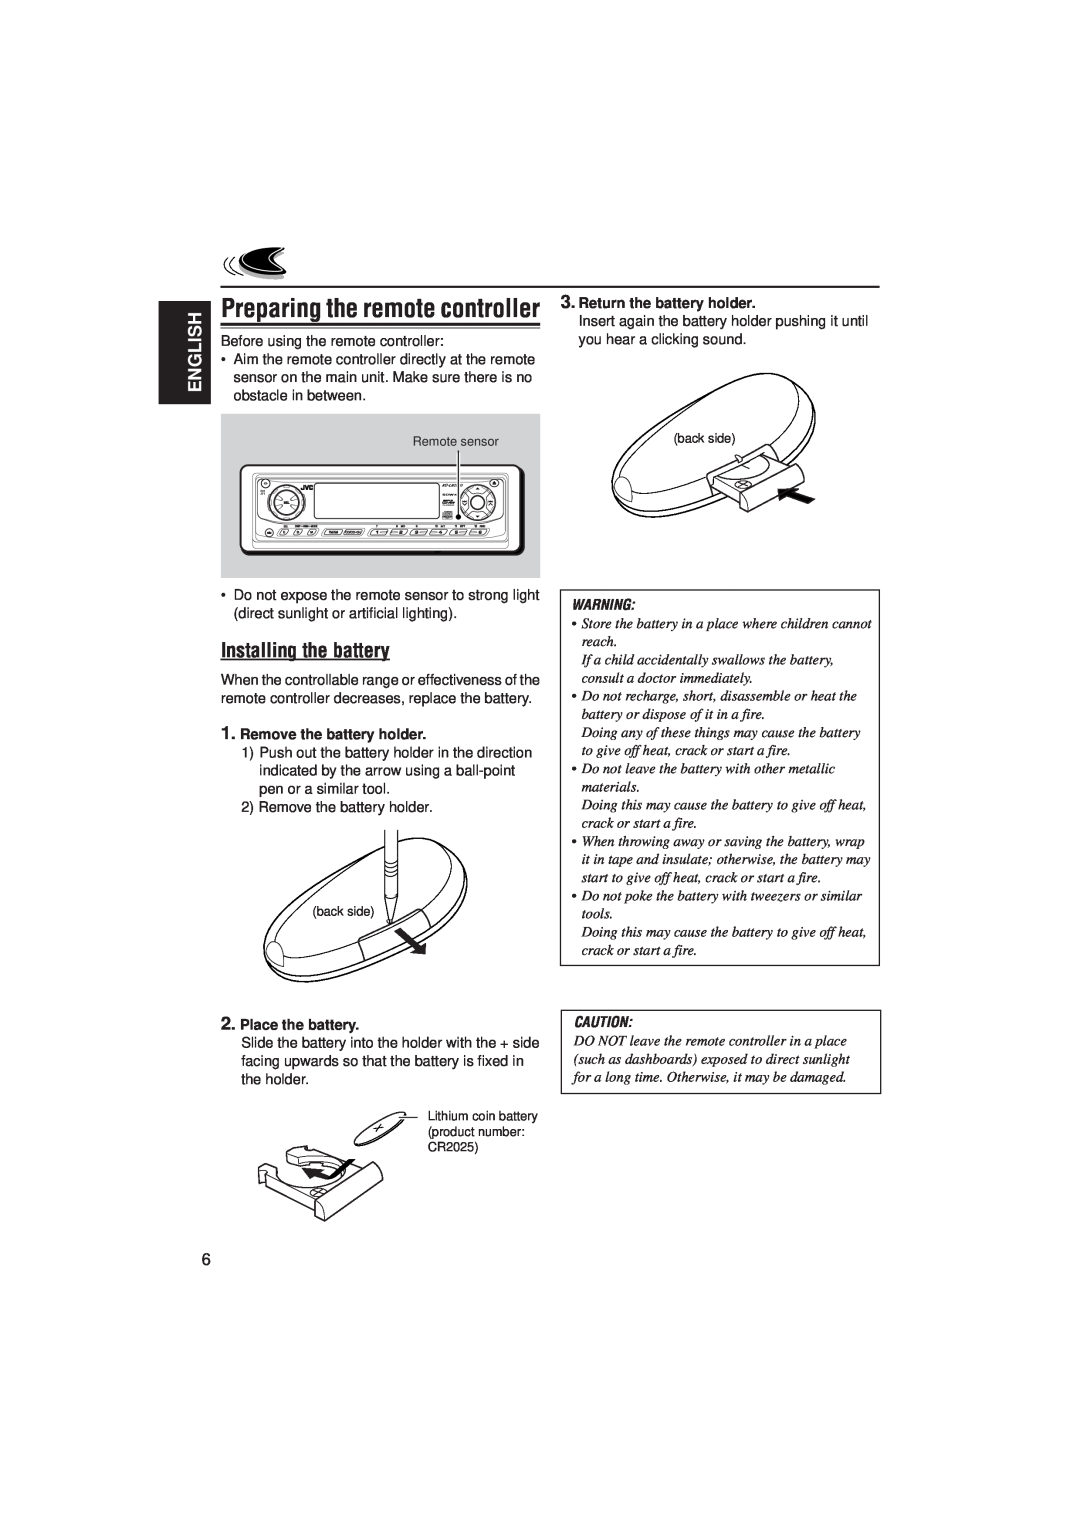 JVC IKD-LH2000 manual Preparing the remote controller, Installing the battery, English, Remove the battery holder 